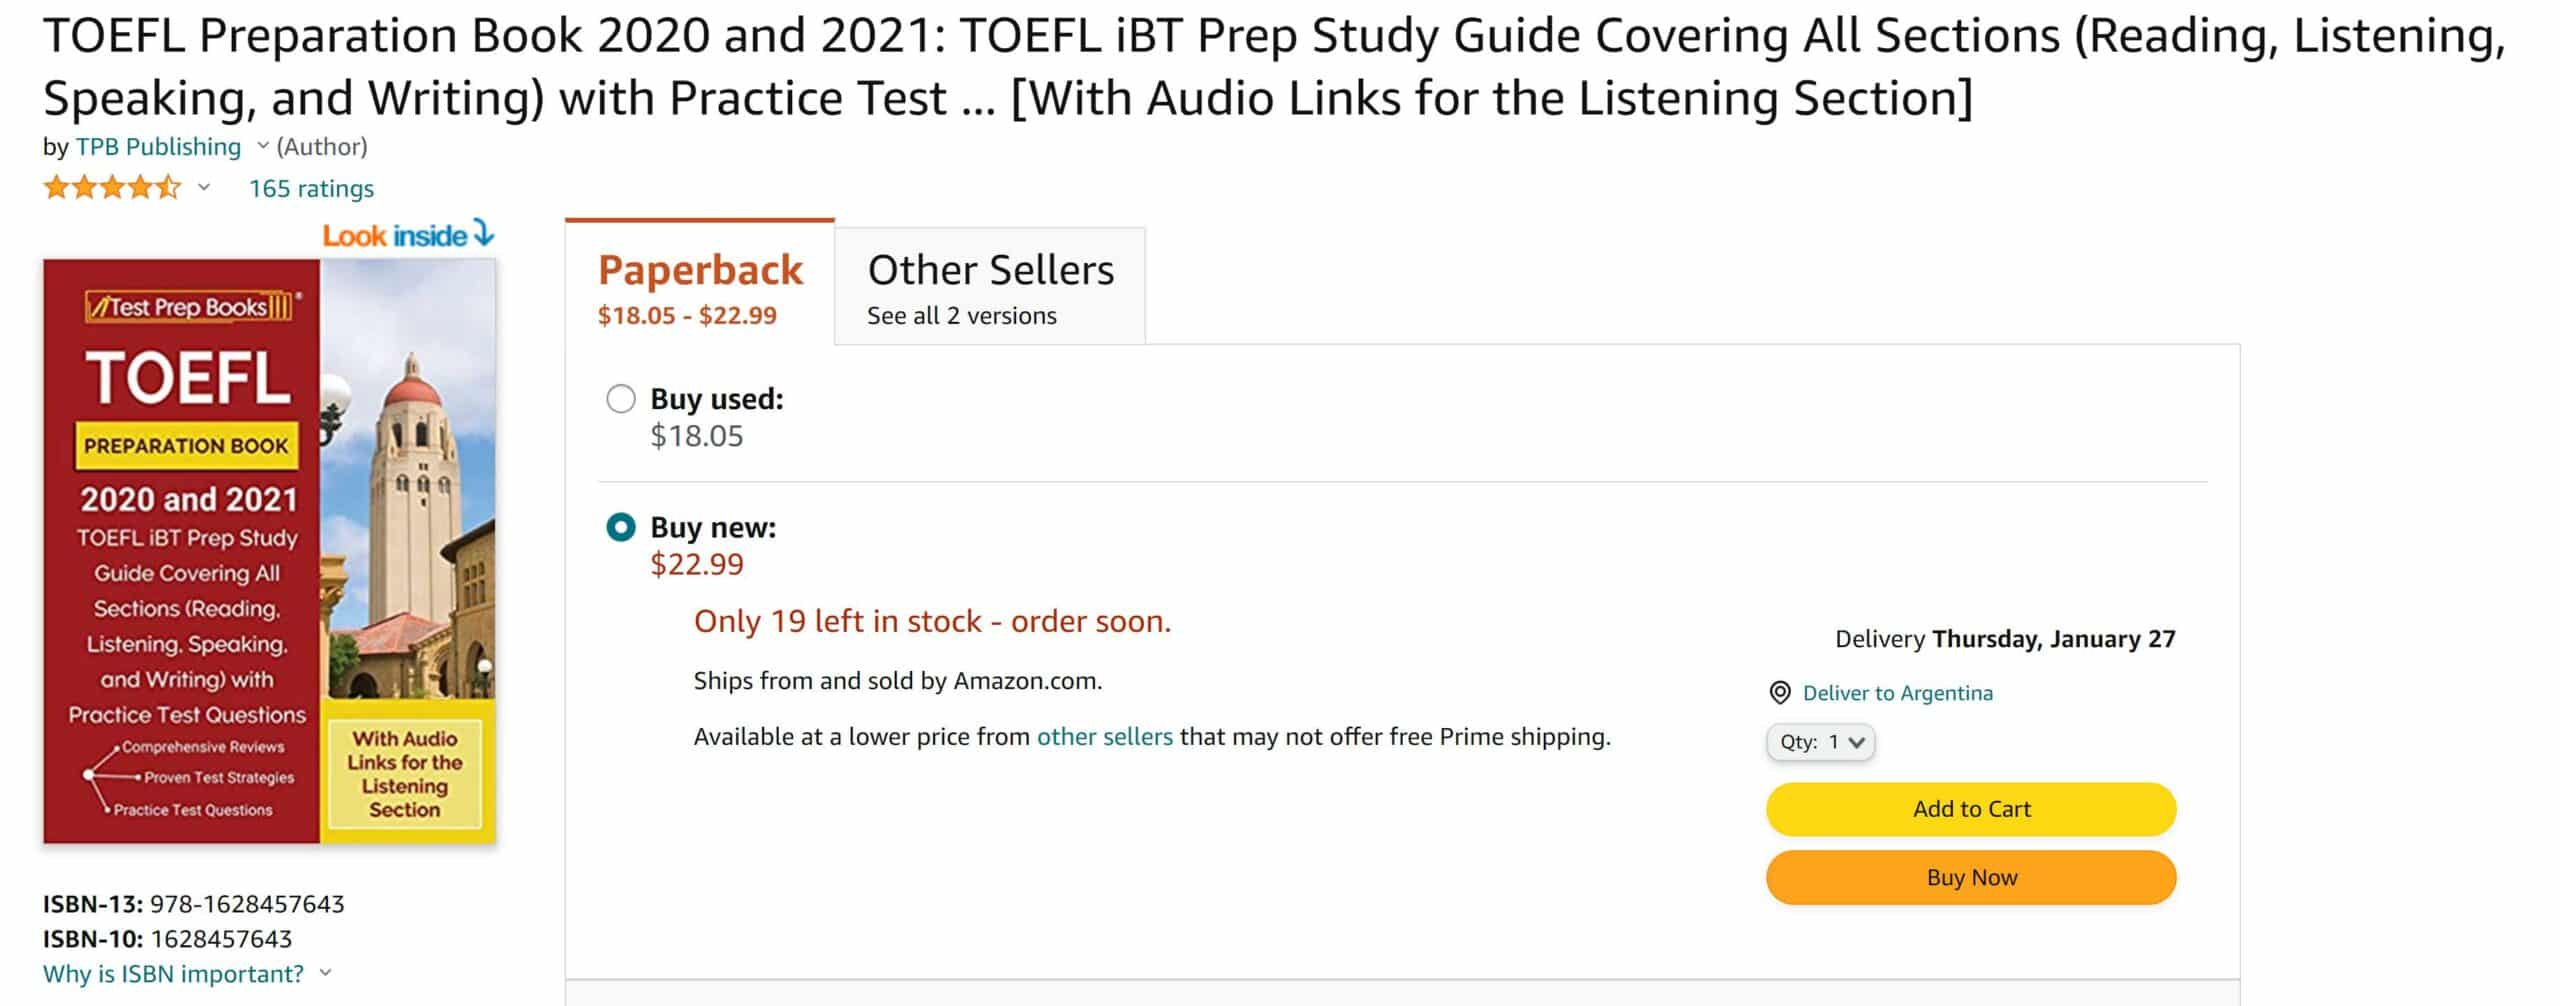 TPB Publish TOEFL Preparation Book 2020 and 2021 Book or Guide